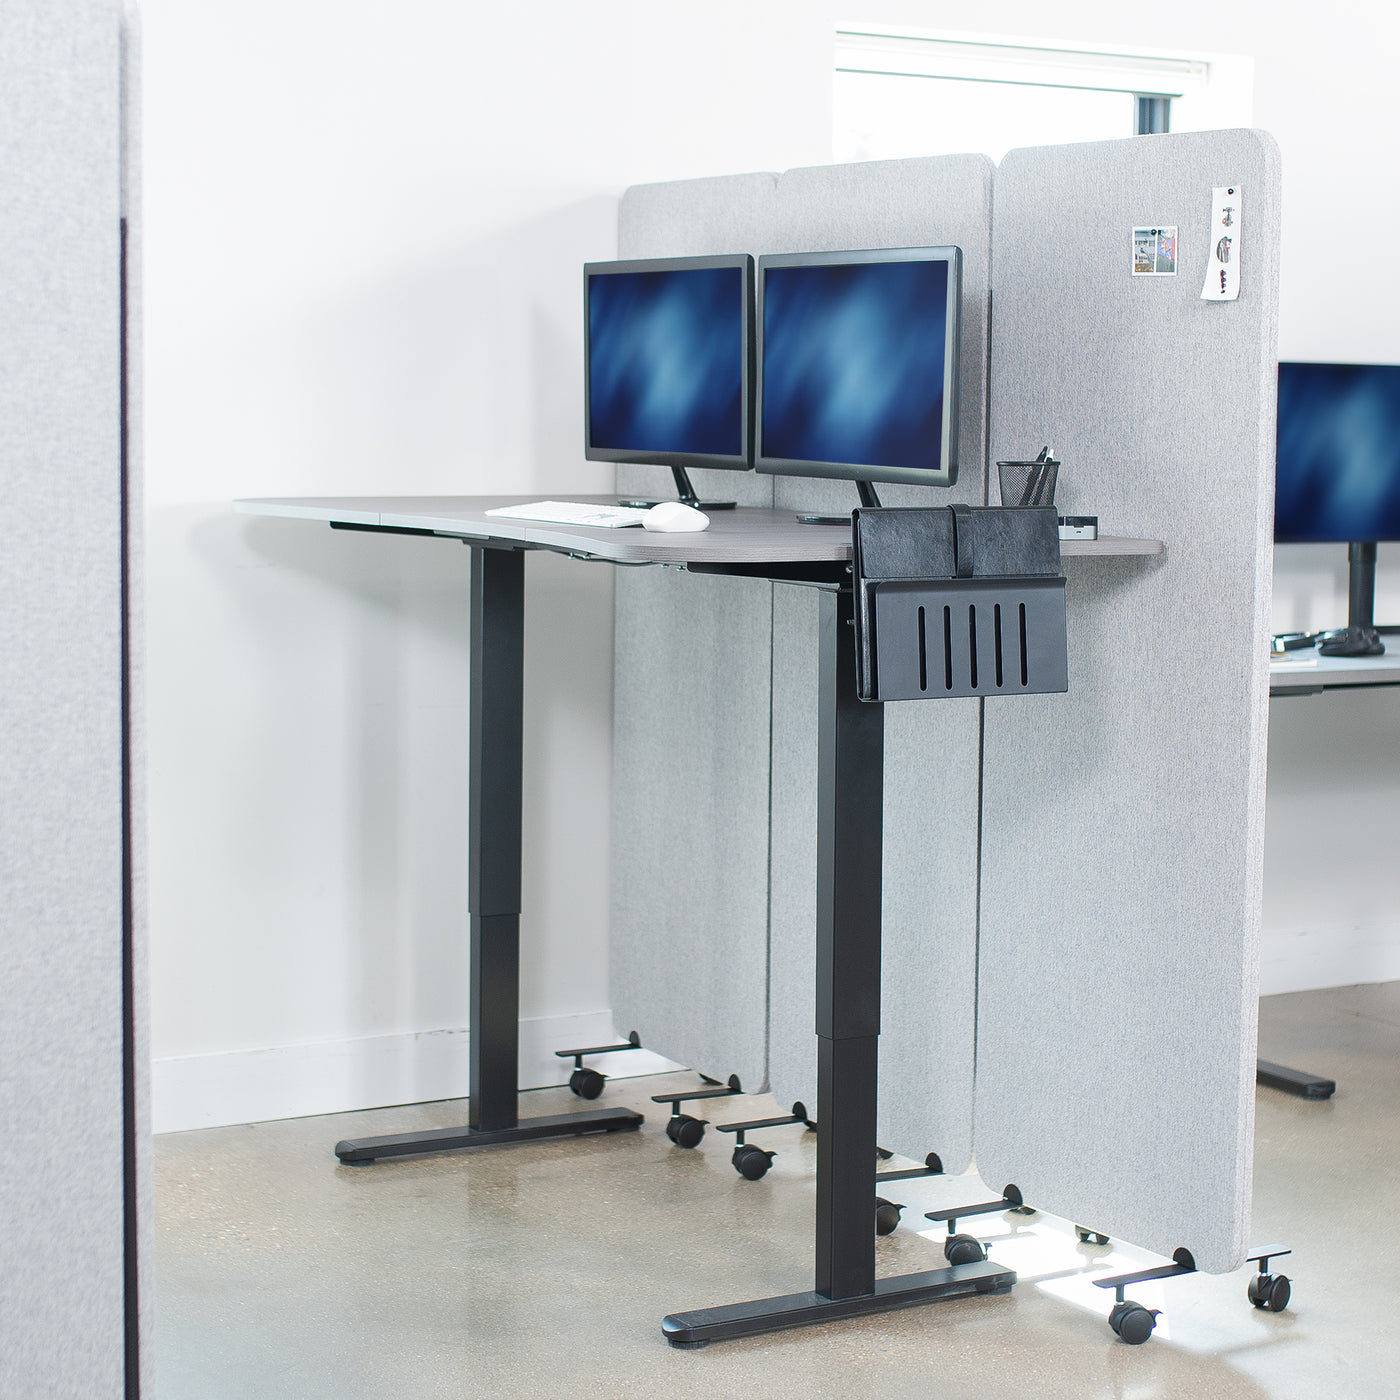 3-Panel Gray Mobile Freestanding Room Divider provides a convenient partition and workspace privacy.